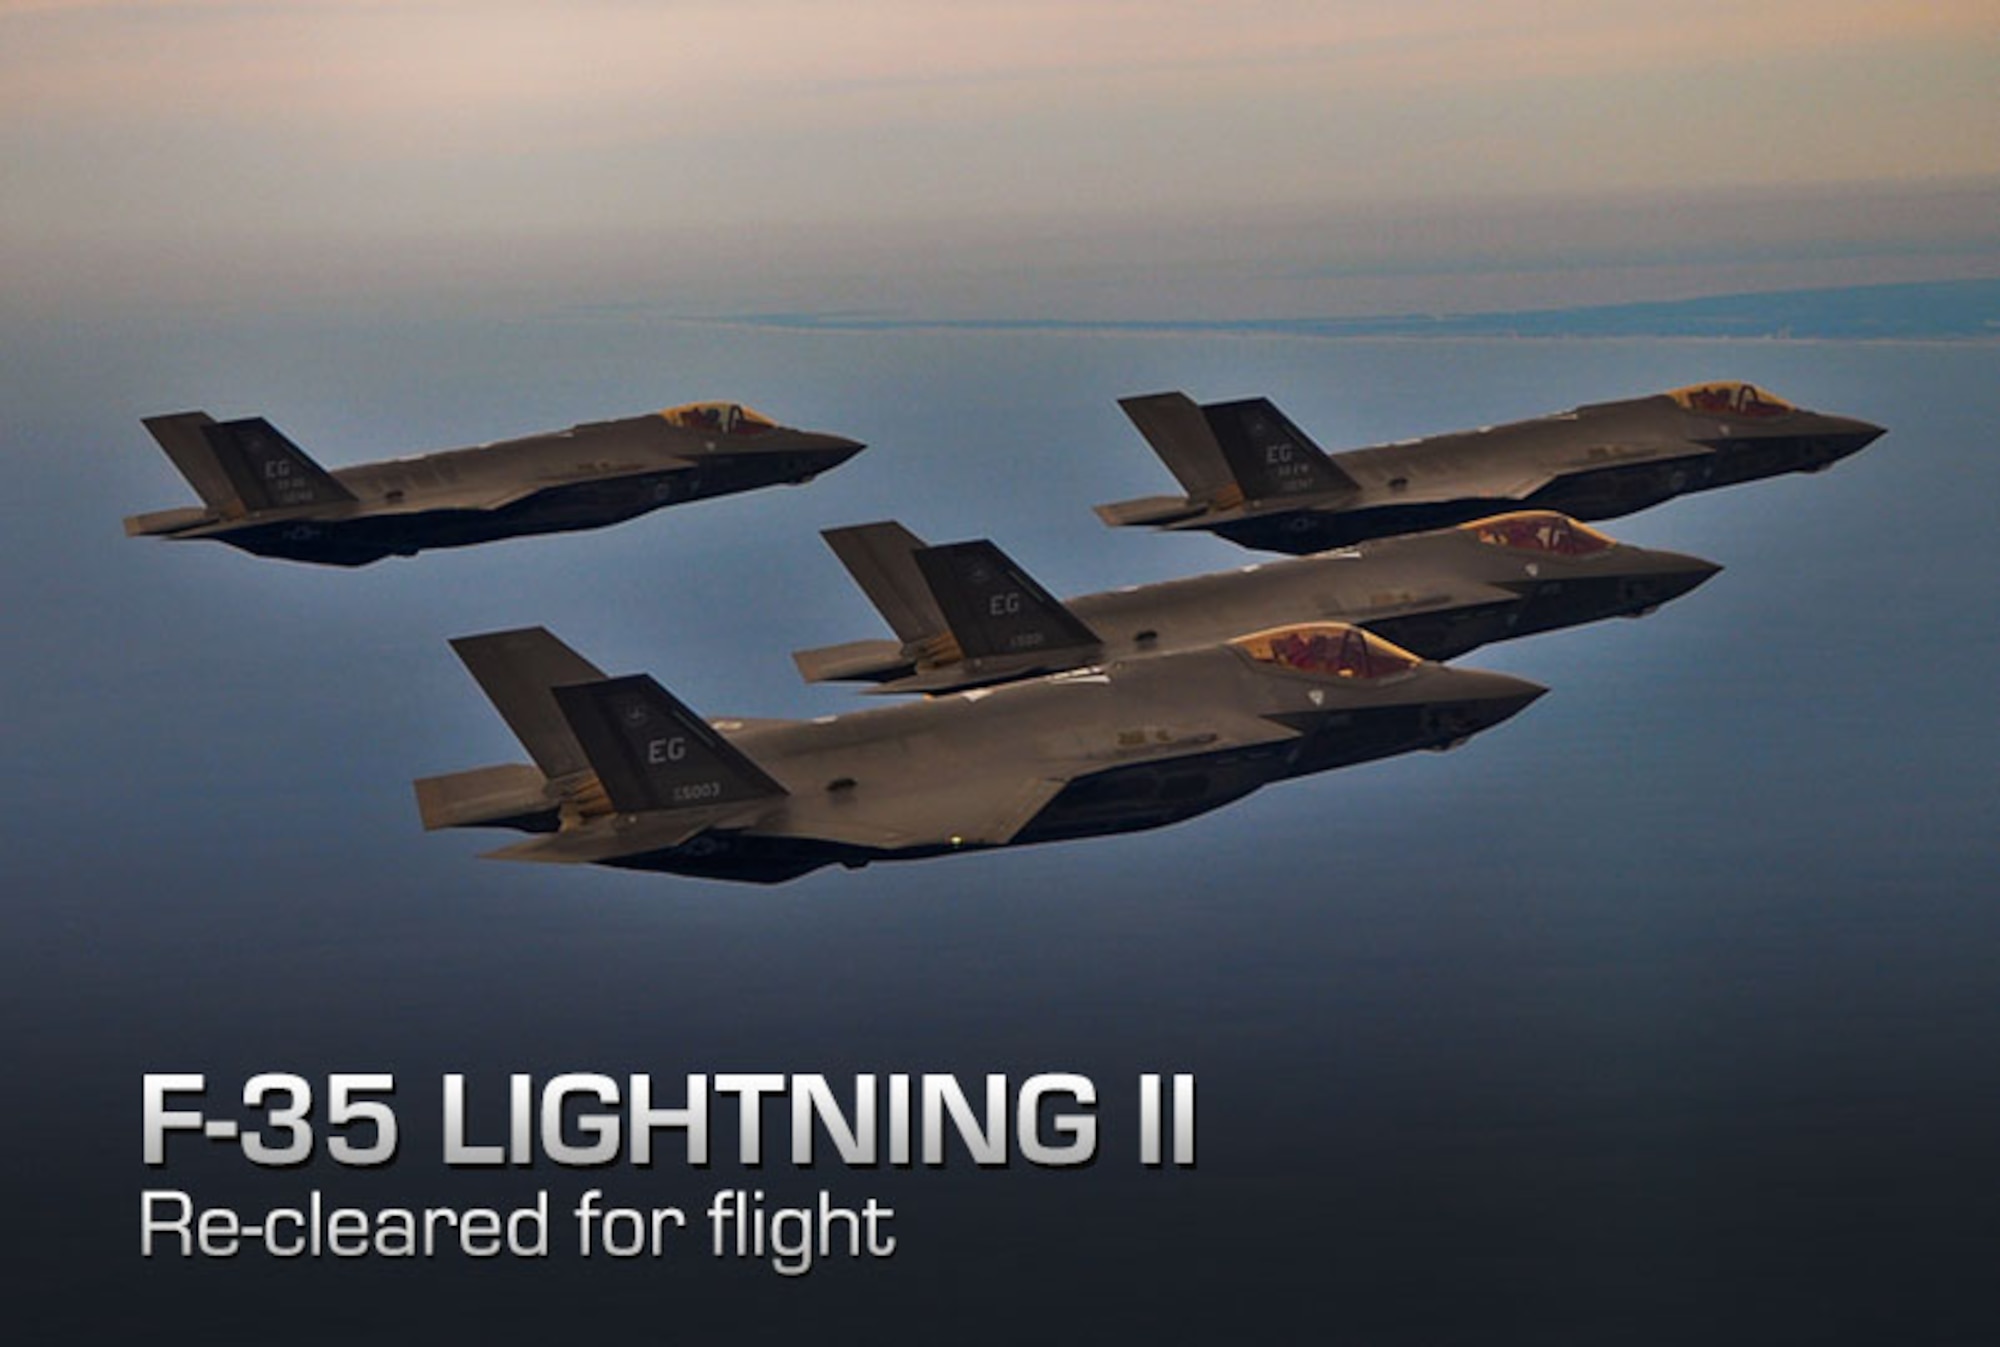 A four-ship of F-35A Lightning IIs returns to Eglin Air Force Base, Fla., after a sortie Feb. 1. Pilots with the 33rd Fighter Wing began flying the formation for the first time here last week. (U.S. Air Force photo/Capt. Edward Schmitt)
